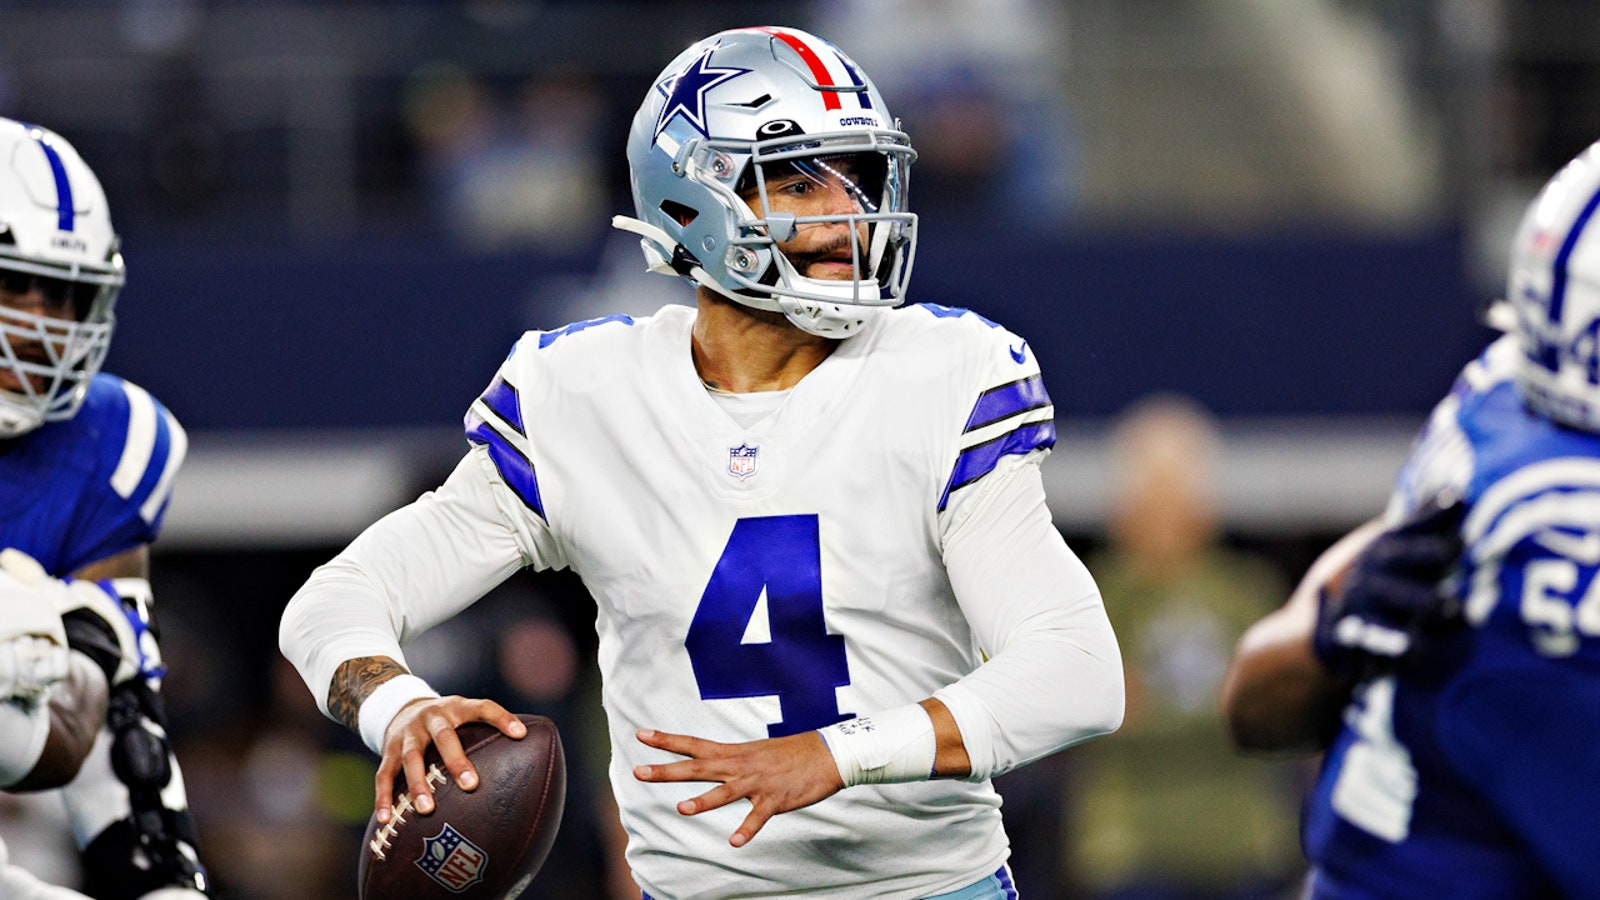 Sammy P breaks down whether you should bet on the Cowboys to cover against the Texans in Week 14.